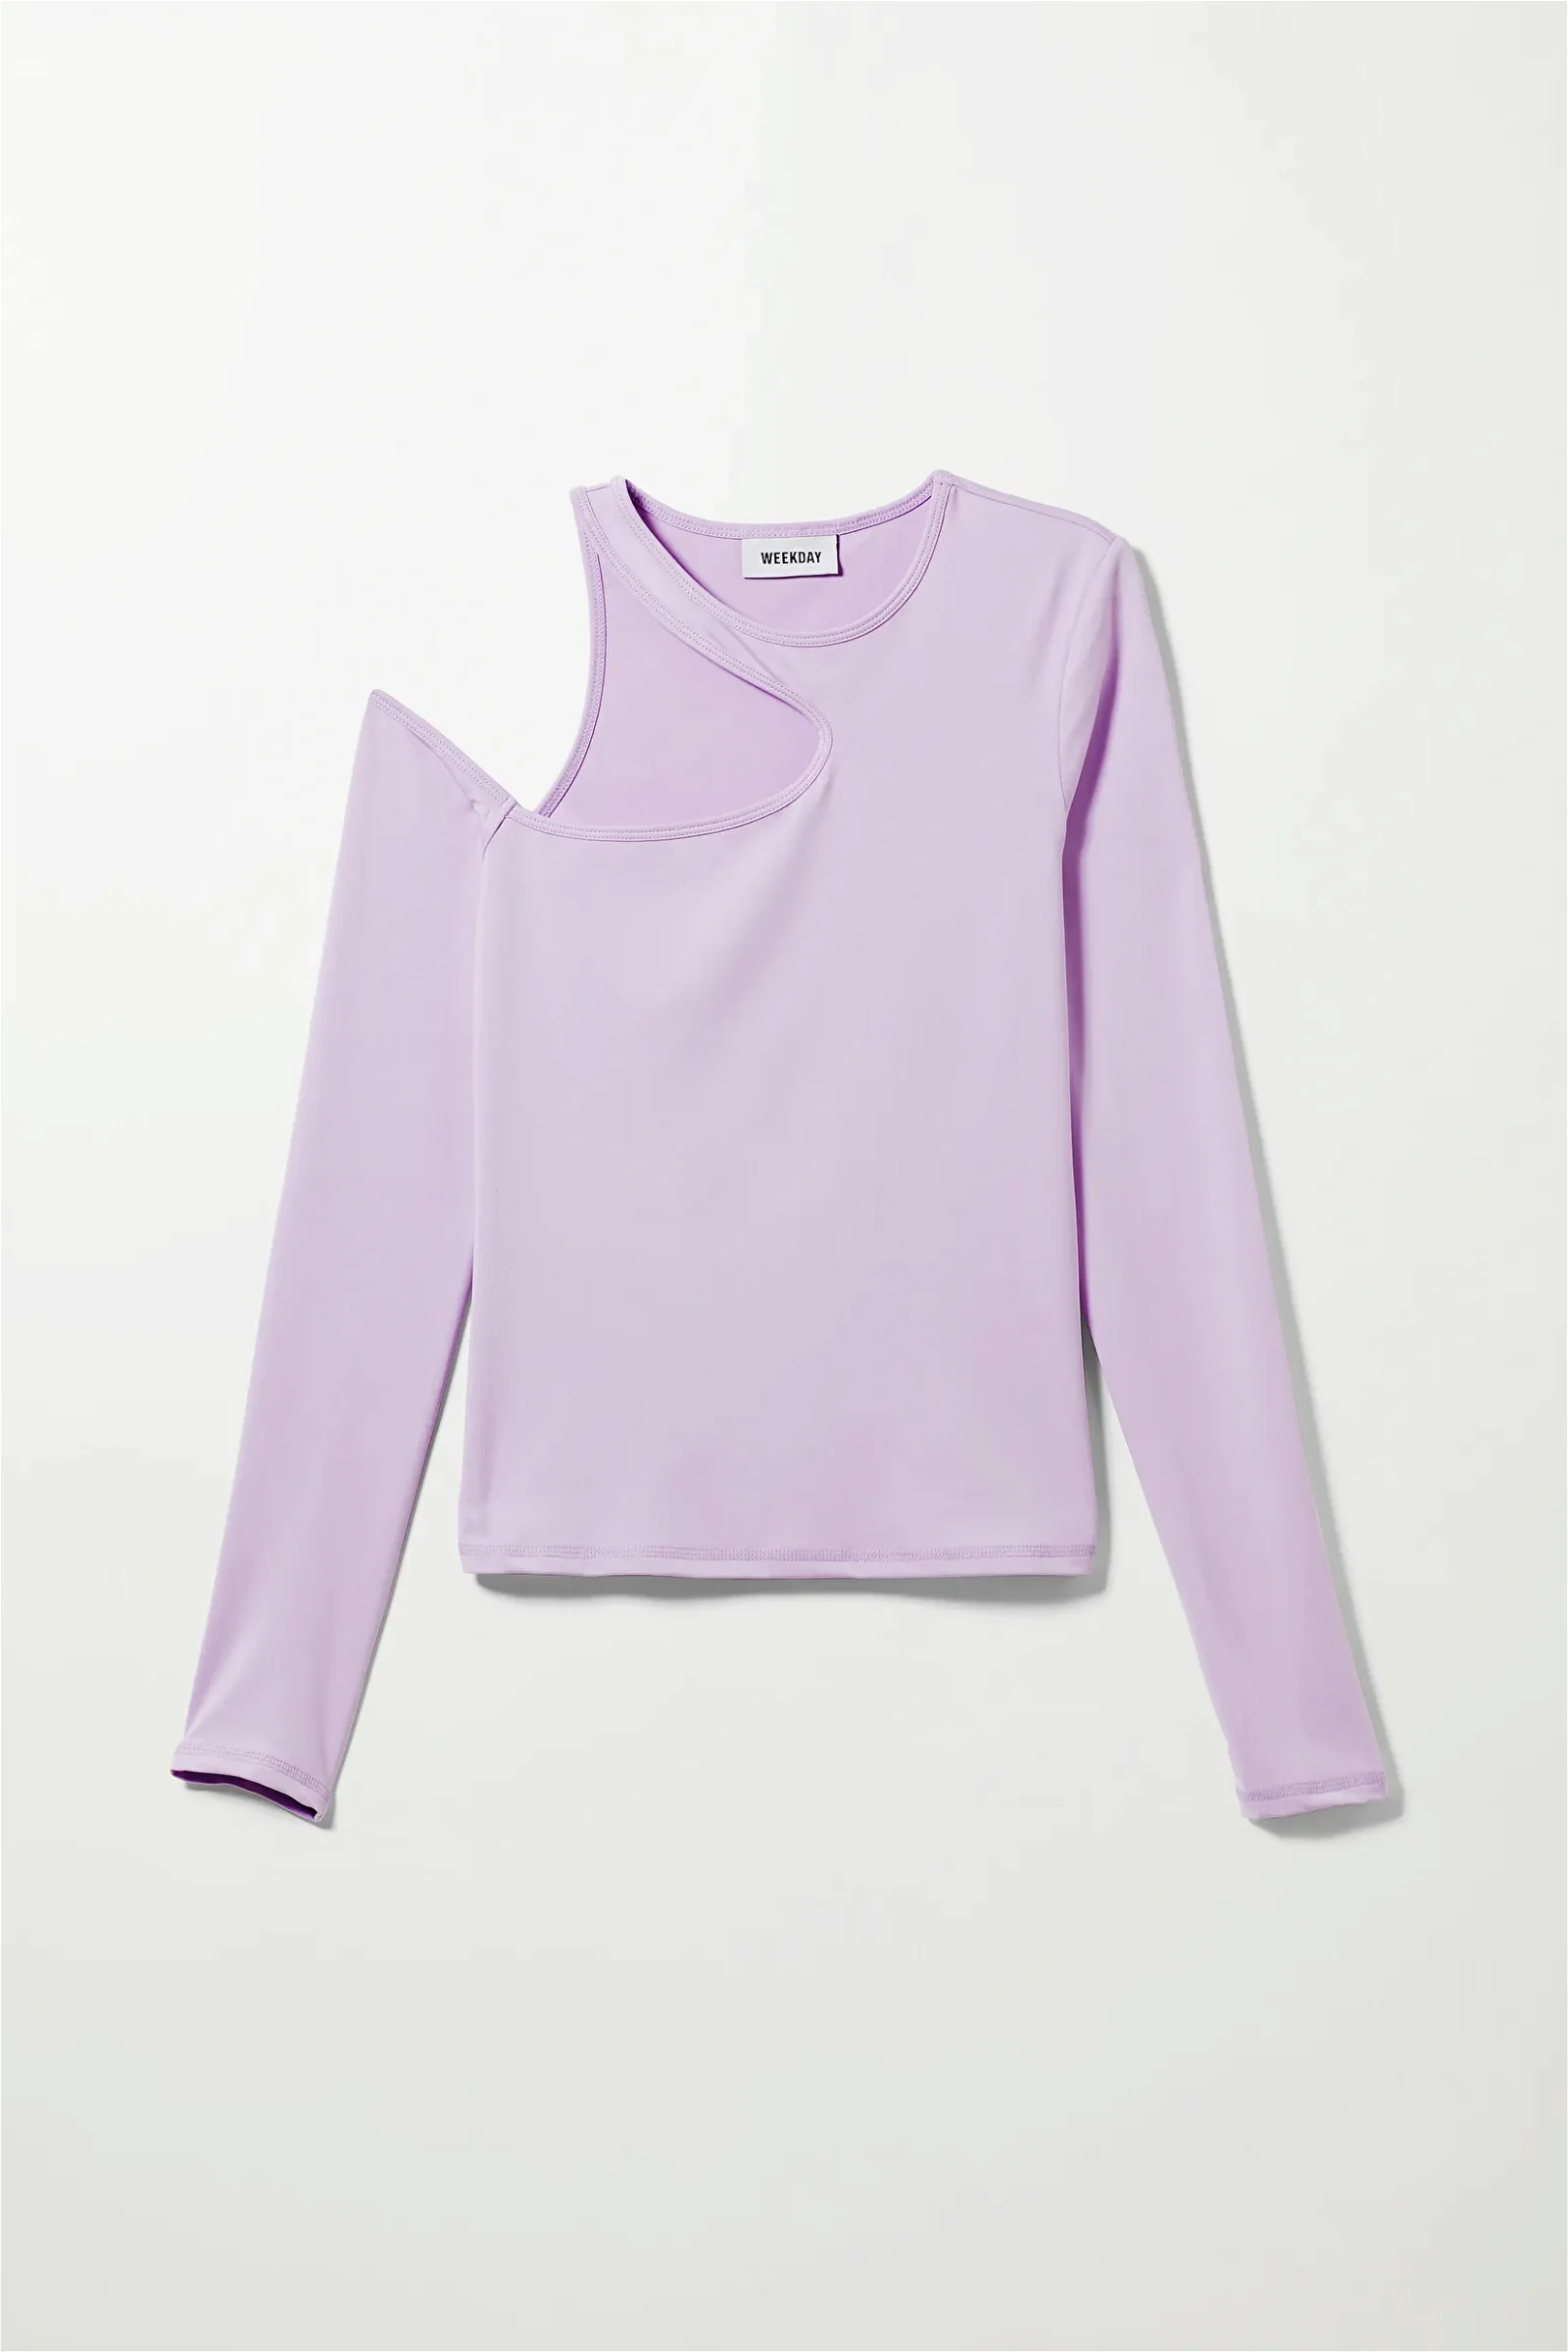 WEEKDAY Sleeve in Ambria Lilac | Endource Long